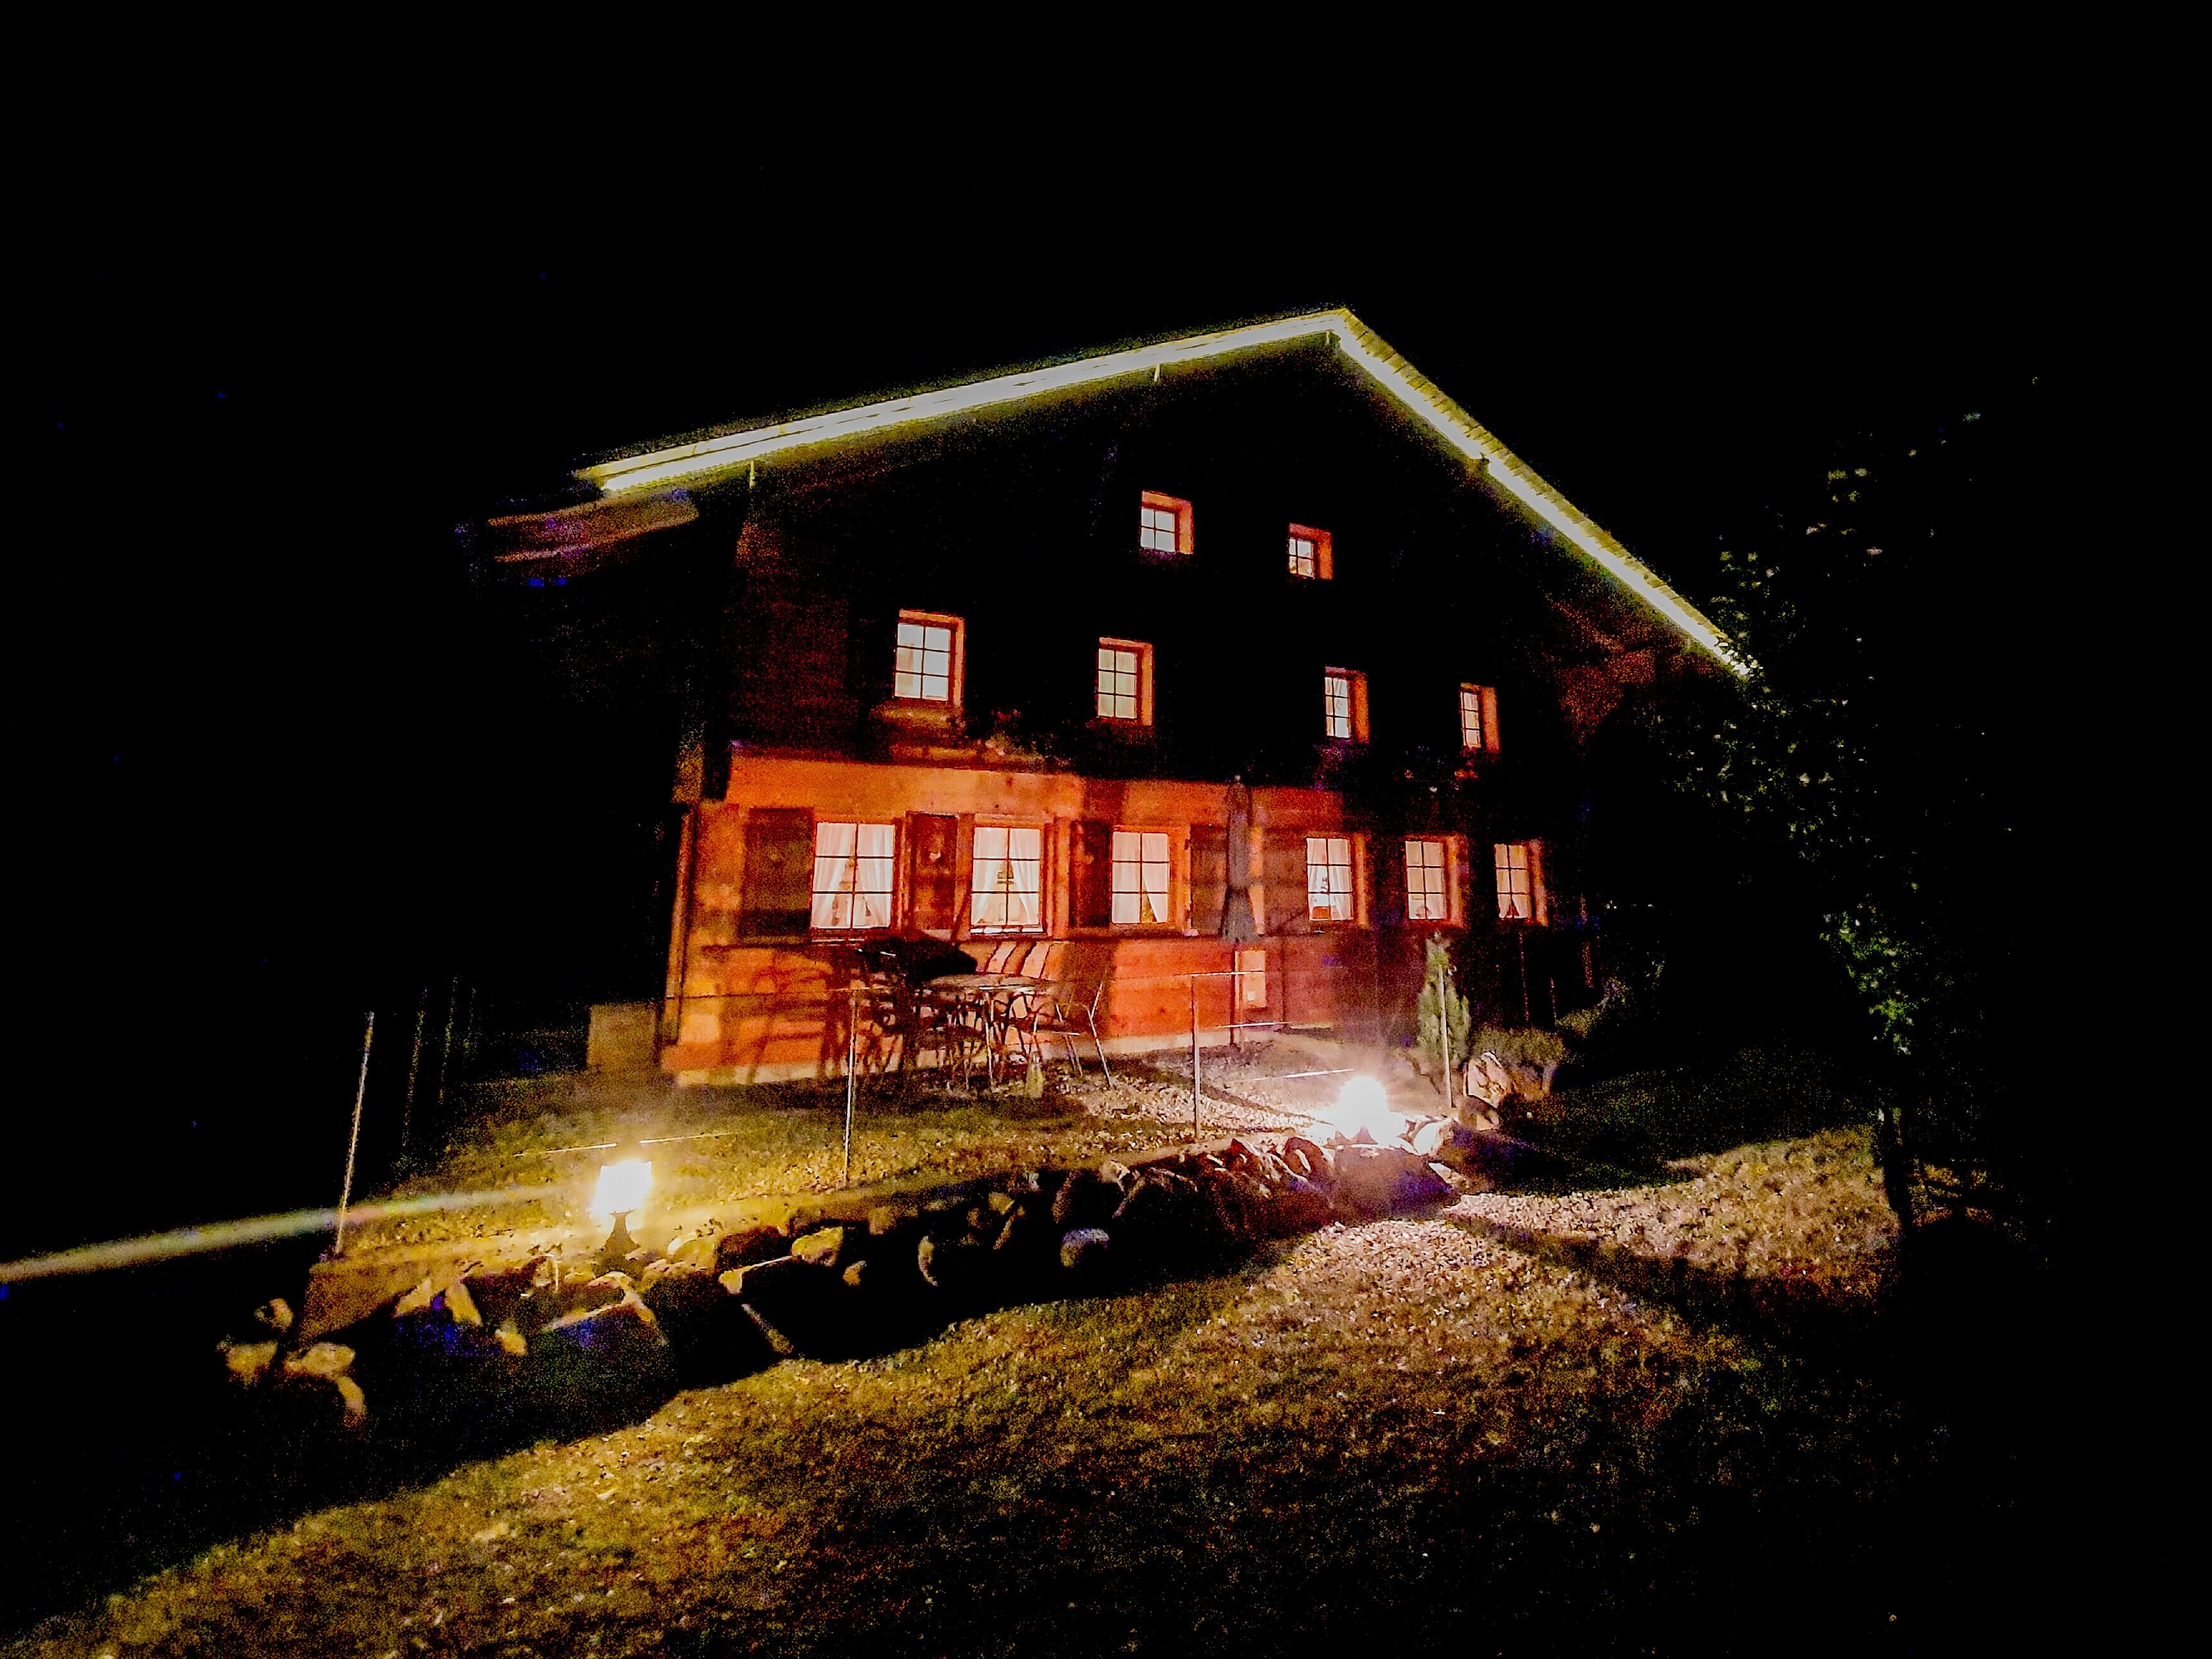 Photographed at night